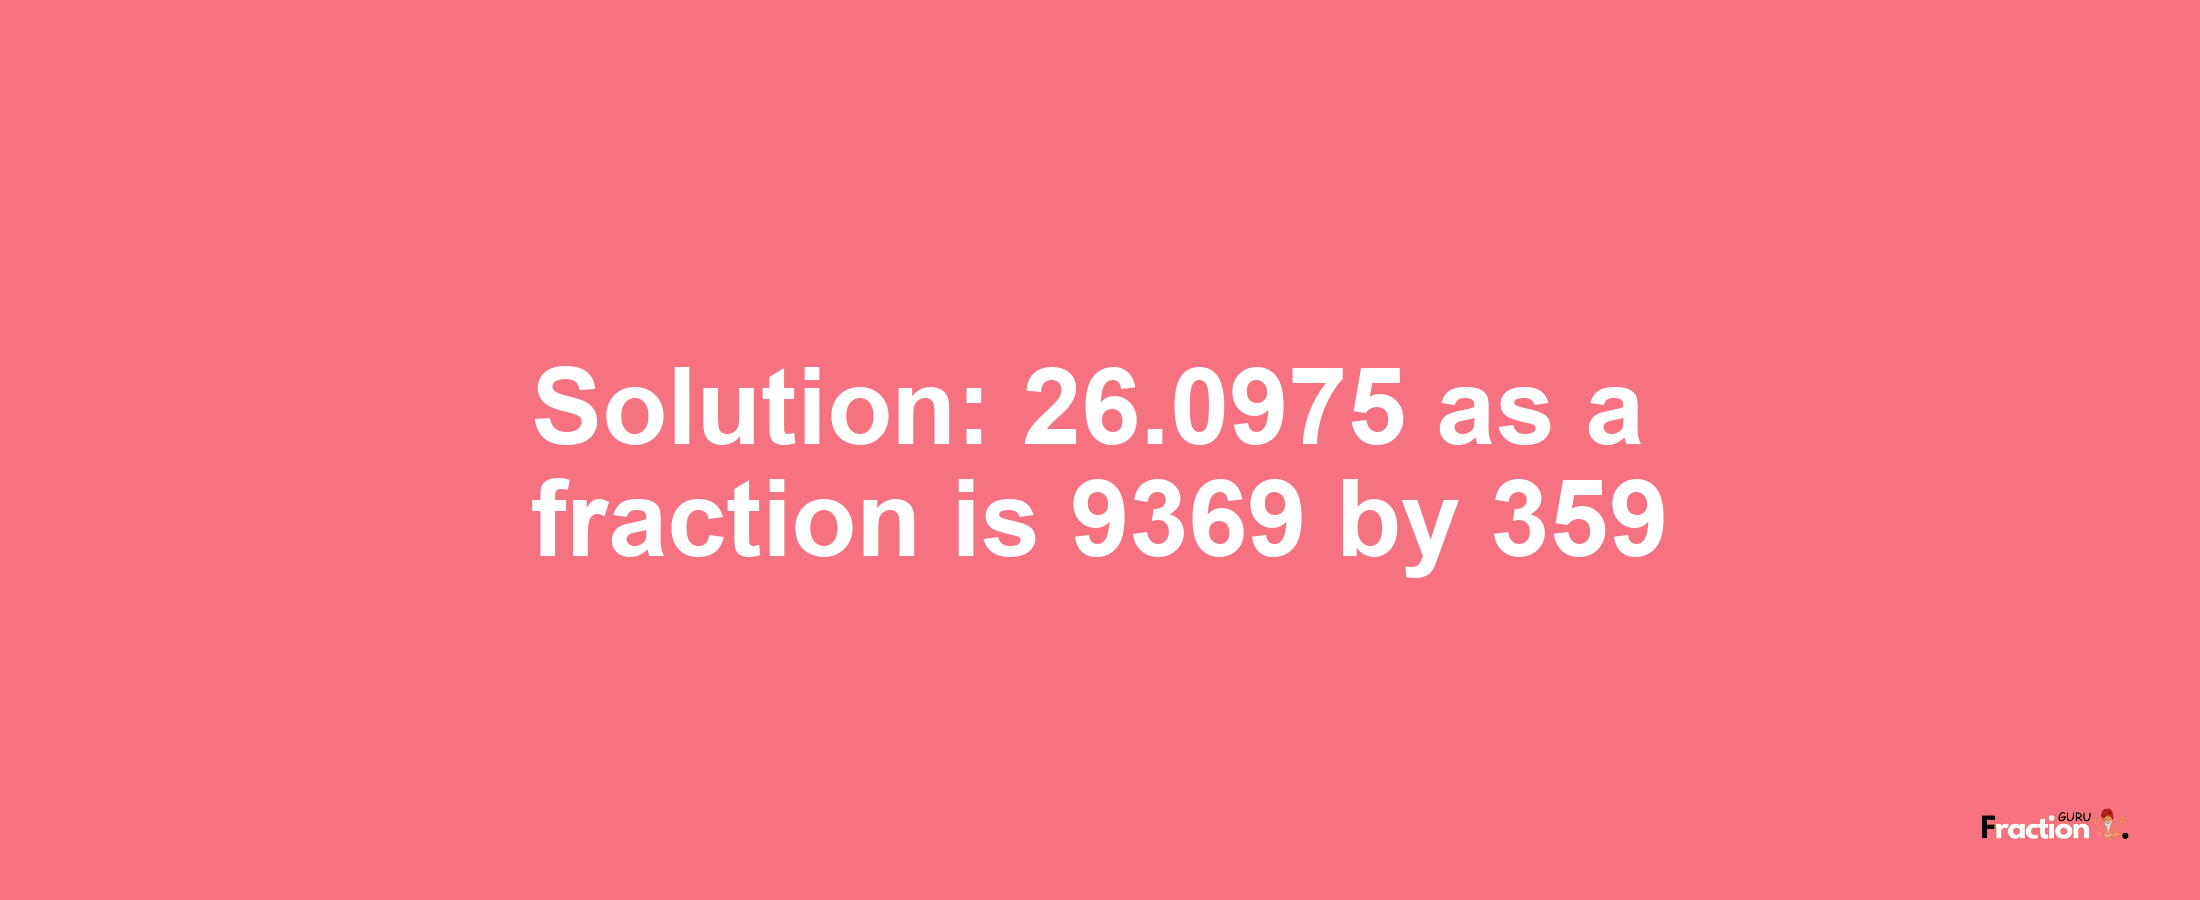 Solution:26.0975 as a fraction is 9369/359